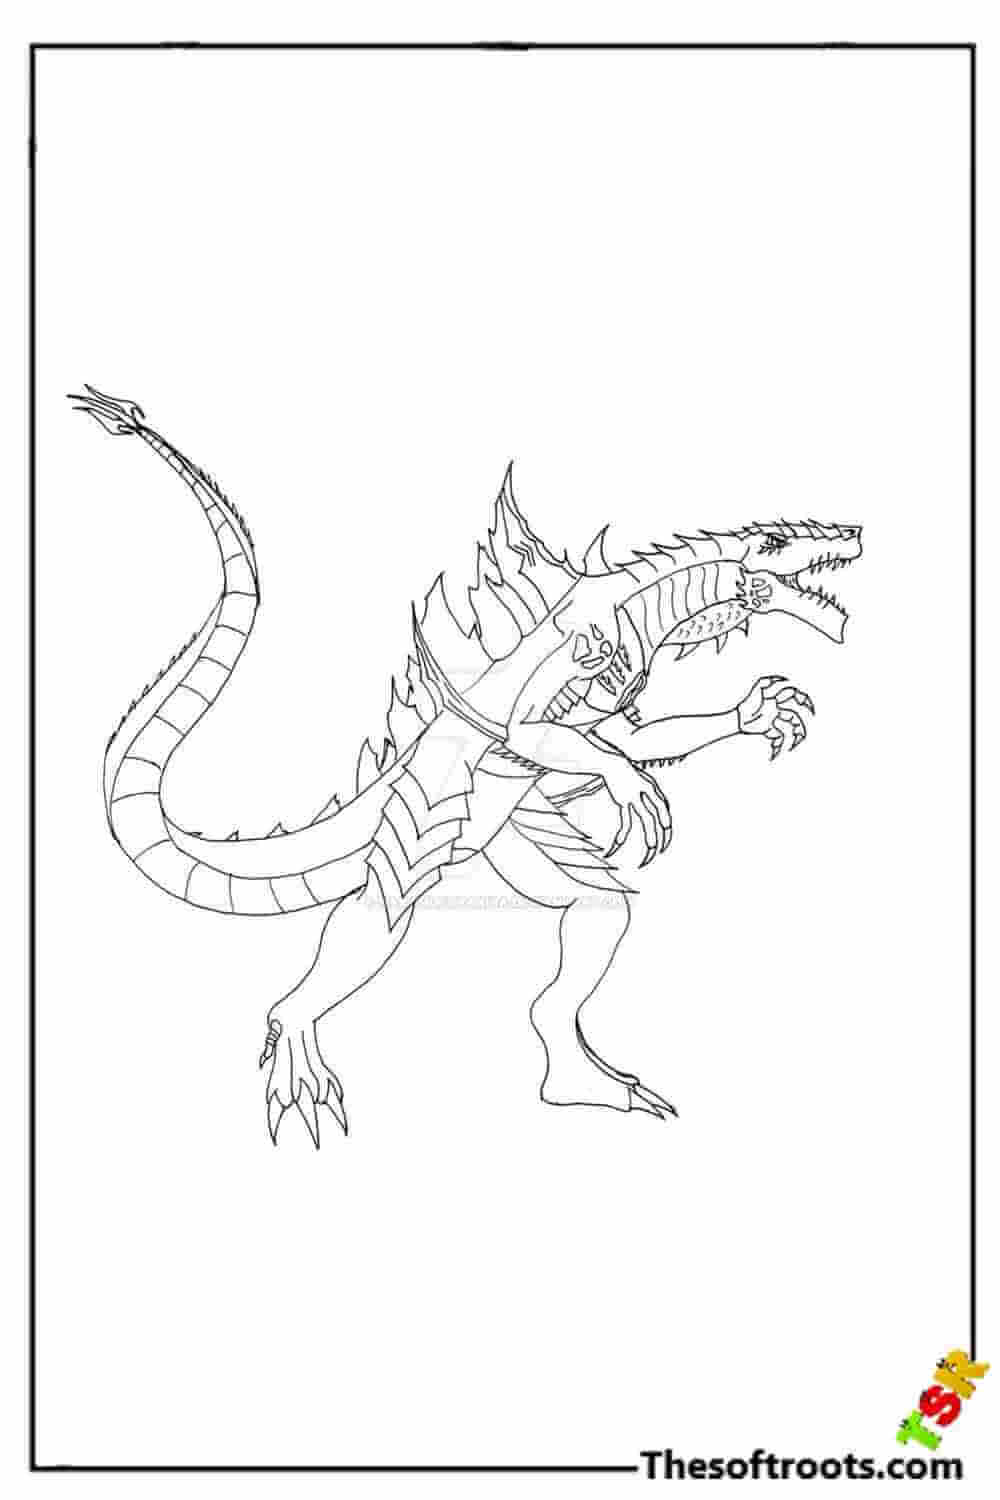 Scary Godzilla coloring pages